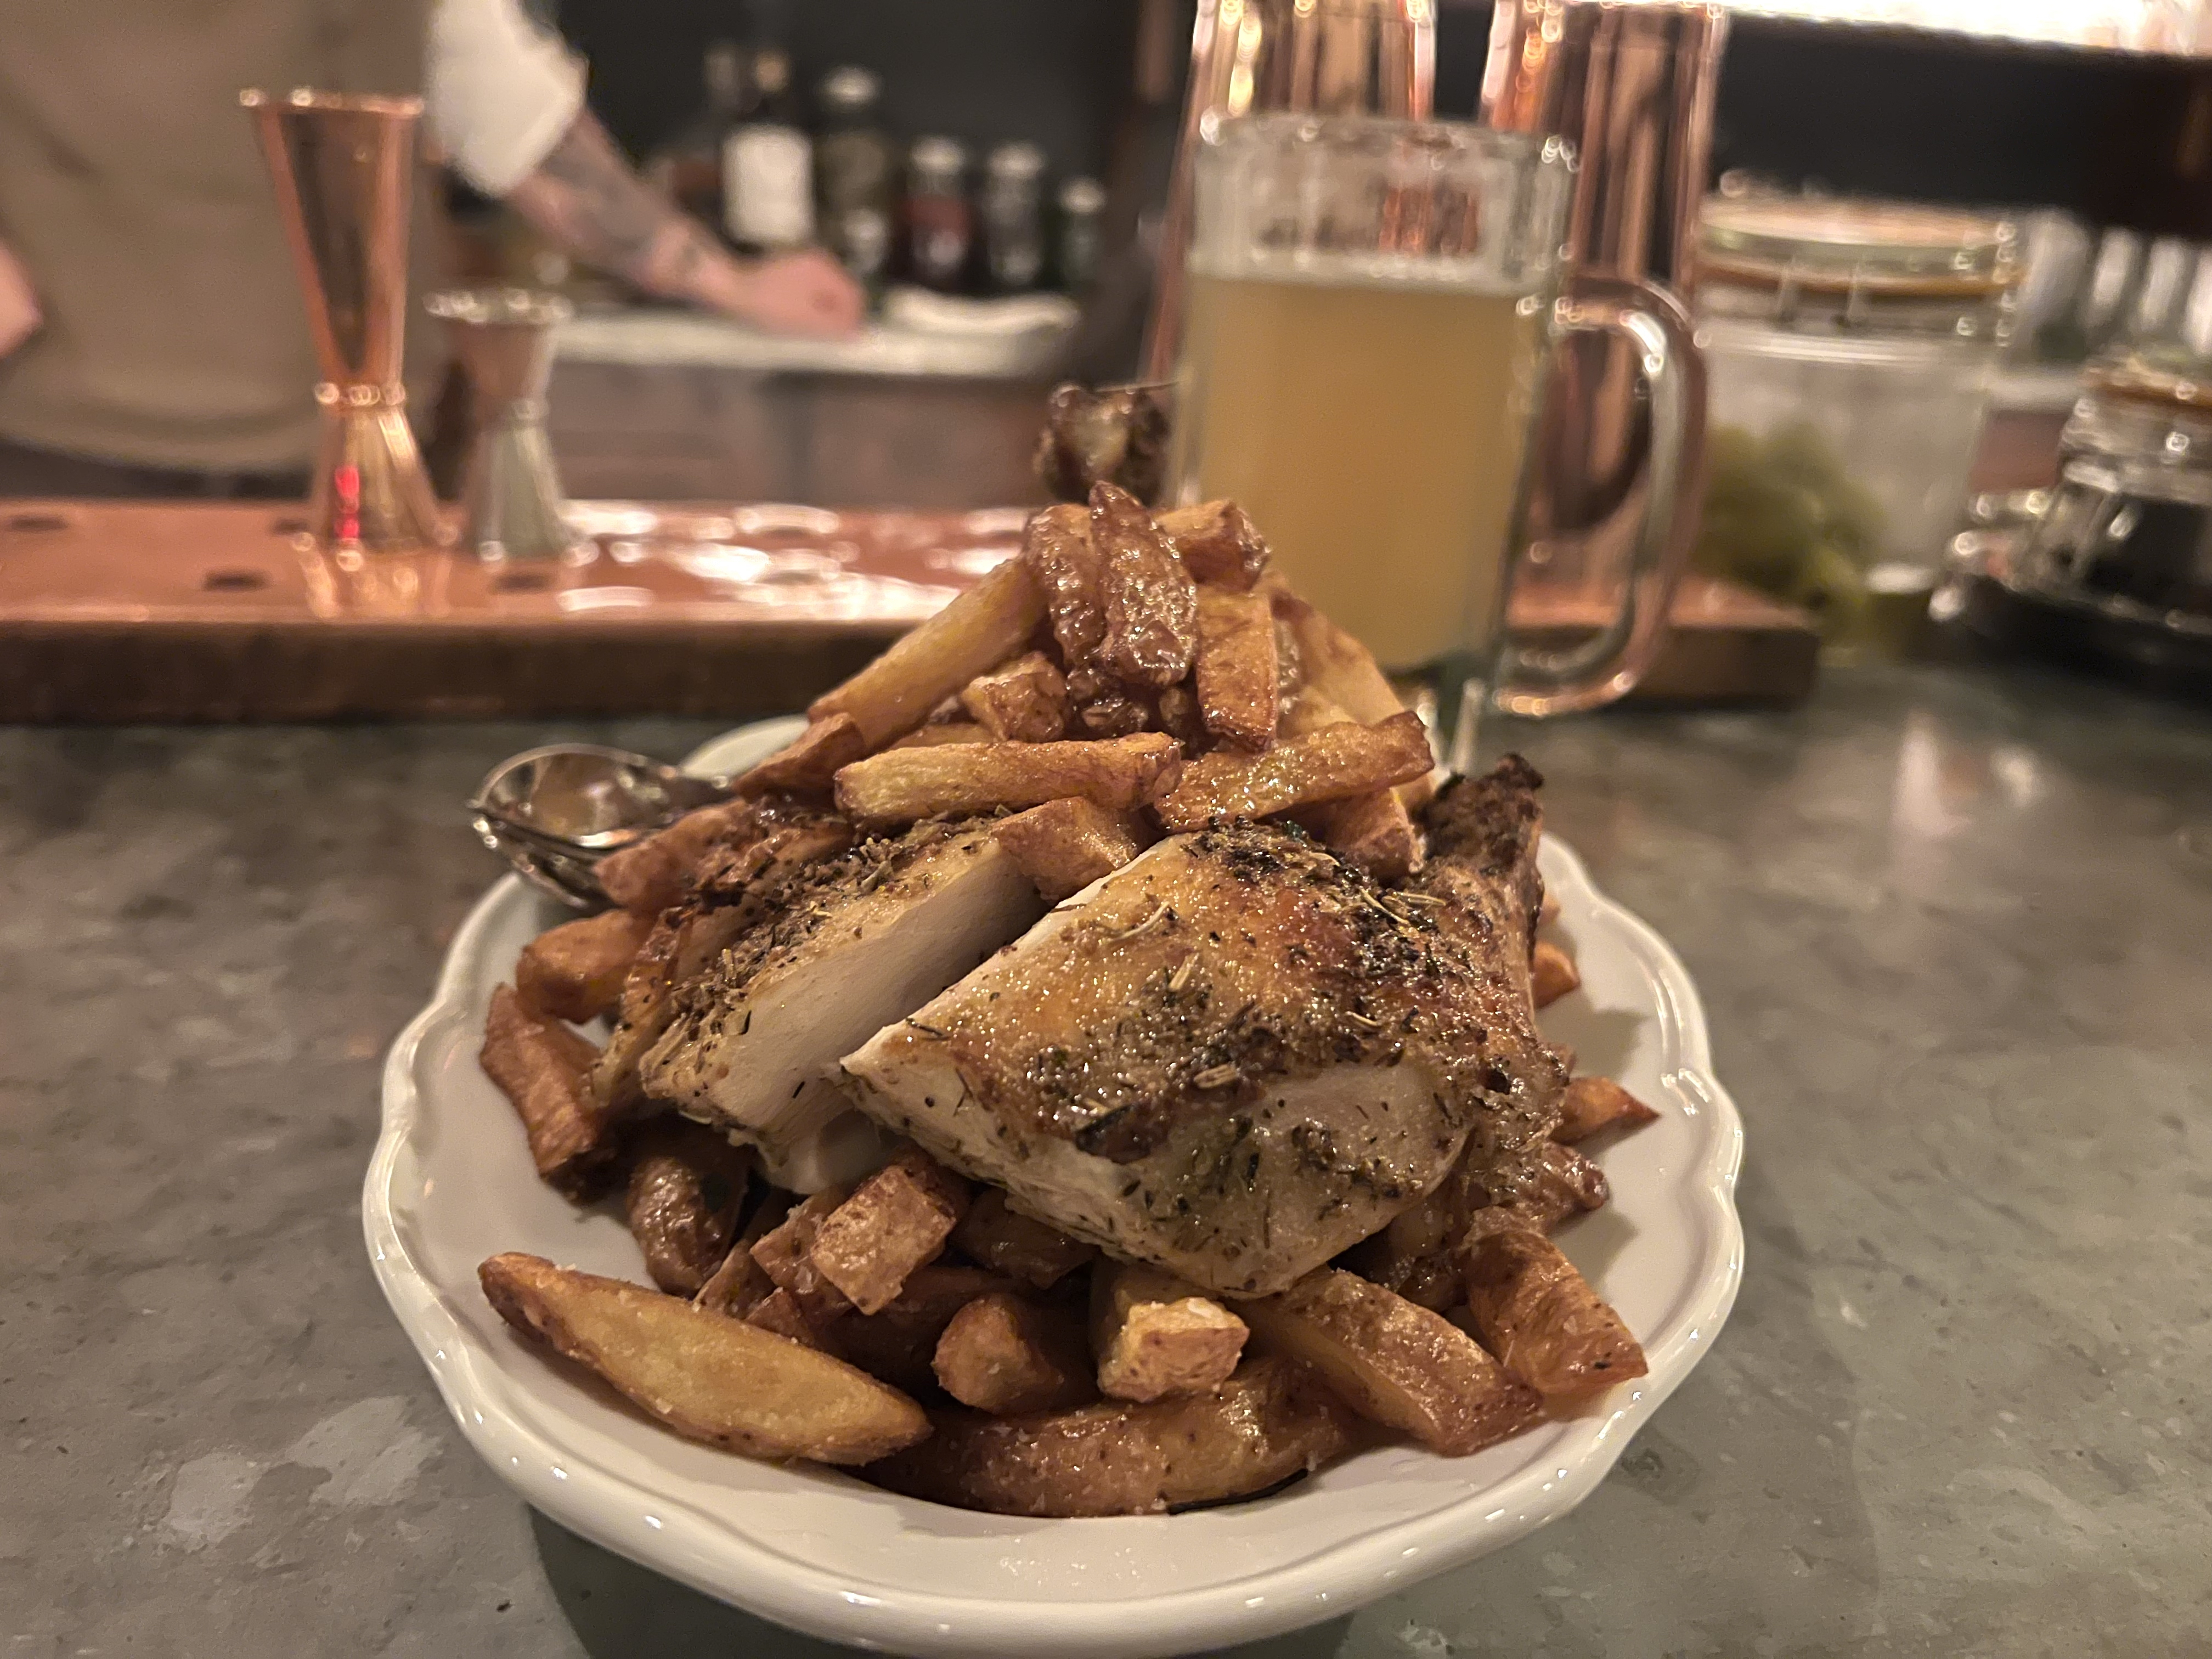 Roast chicken, herbed and bronzed, sits over a pile of fries on a white plate. A glass mug of beer is visible behind the dish.